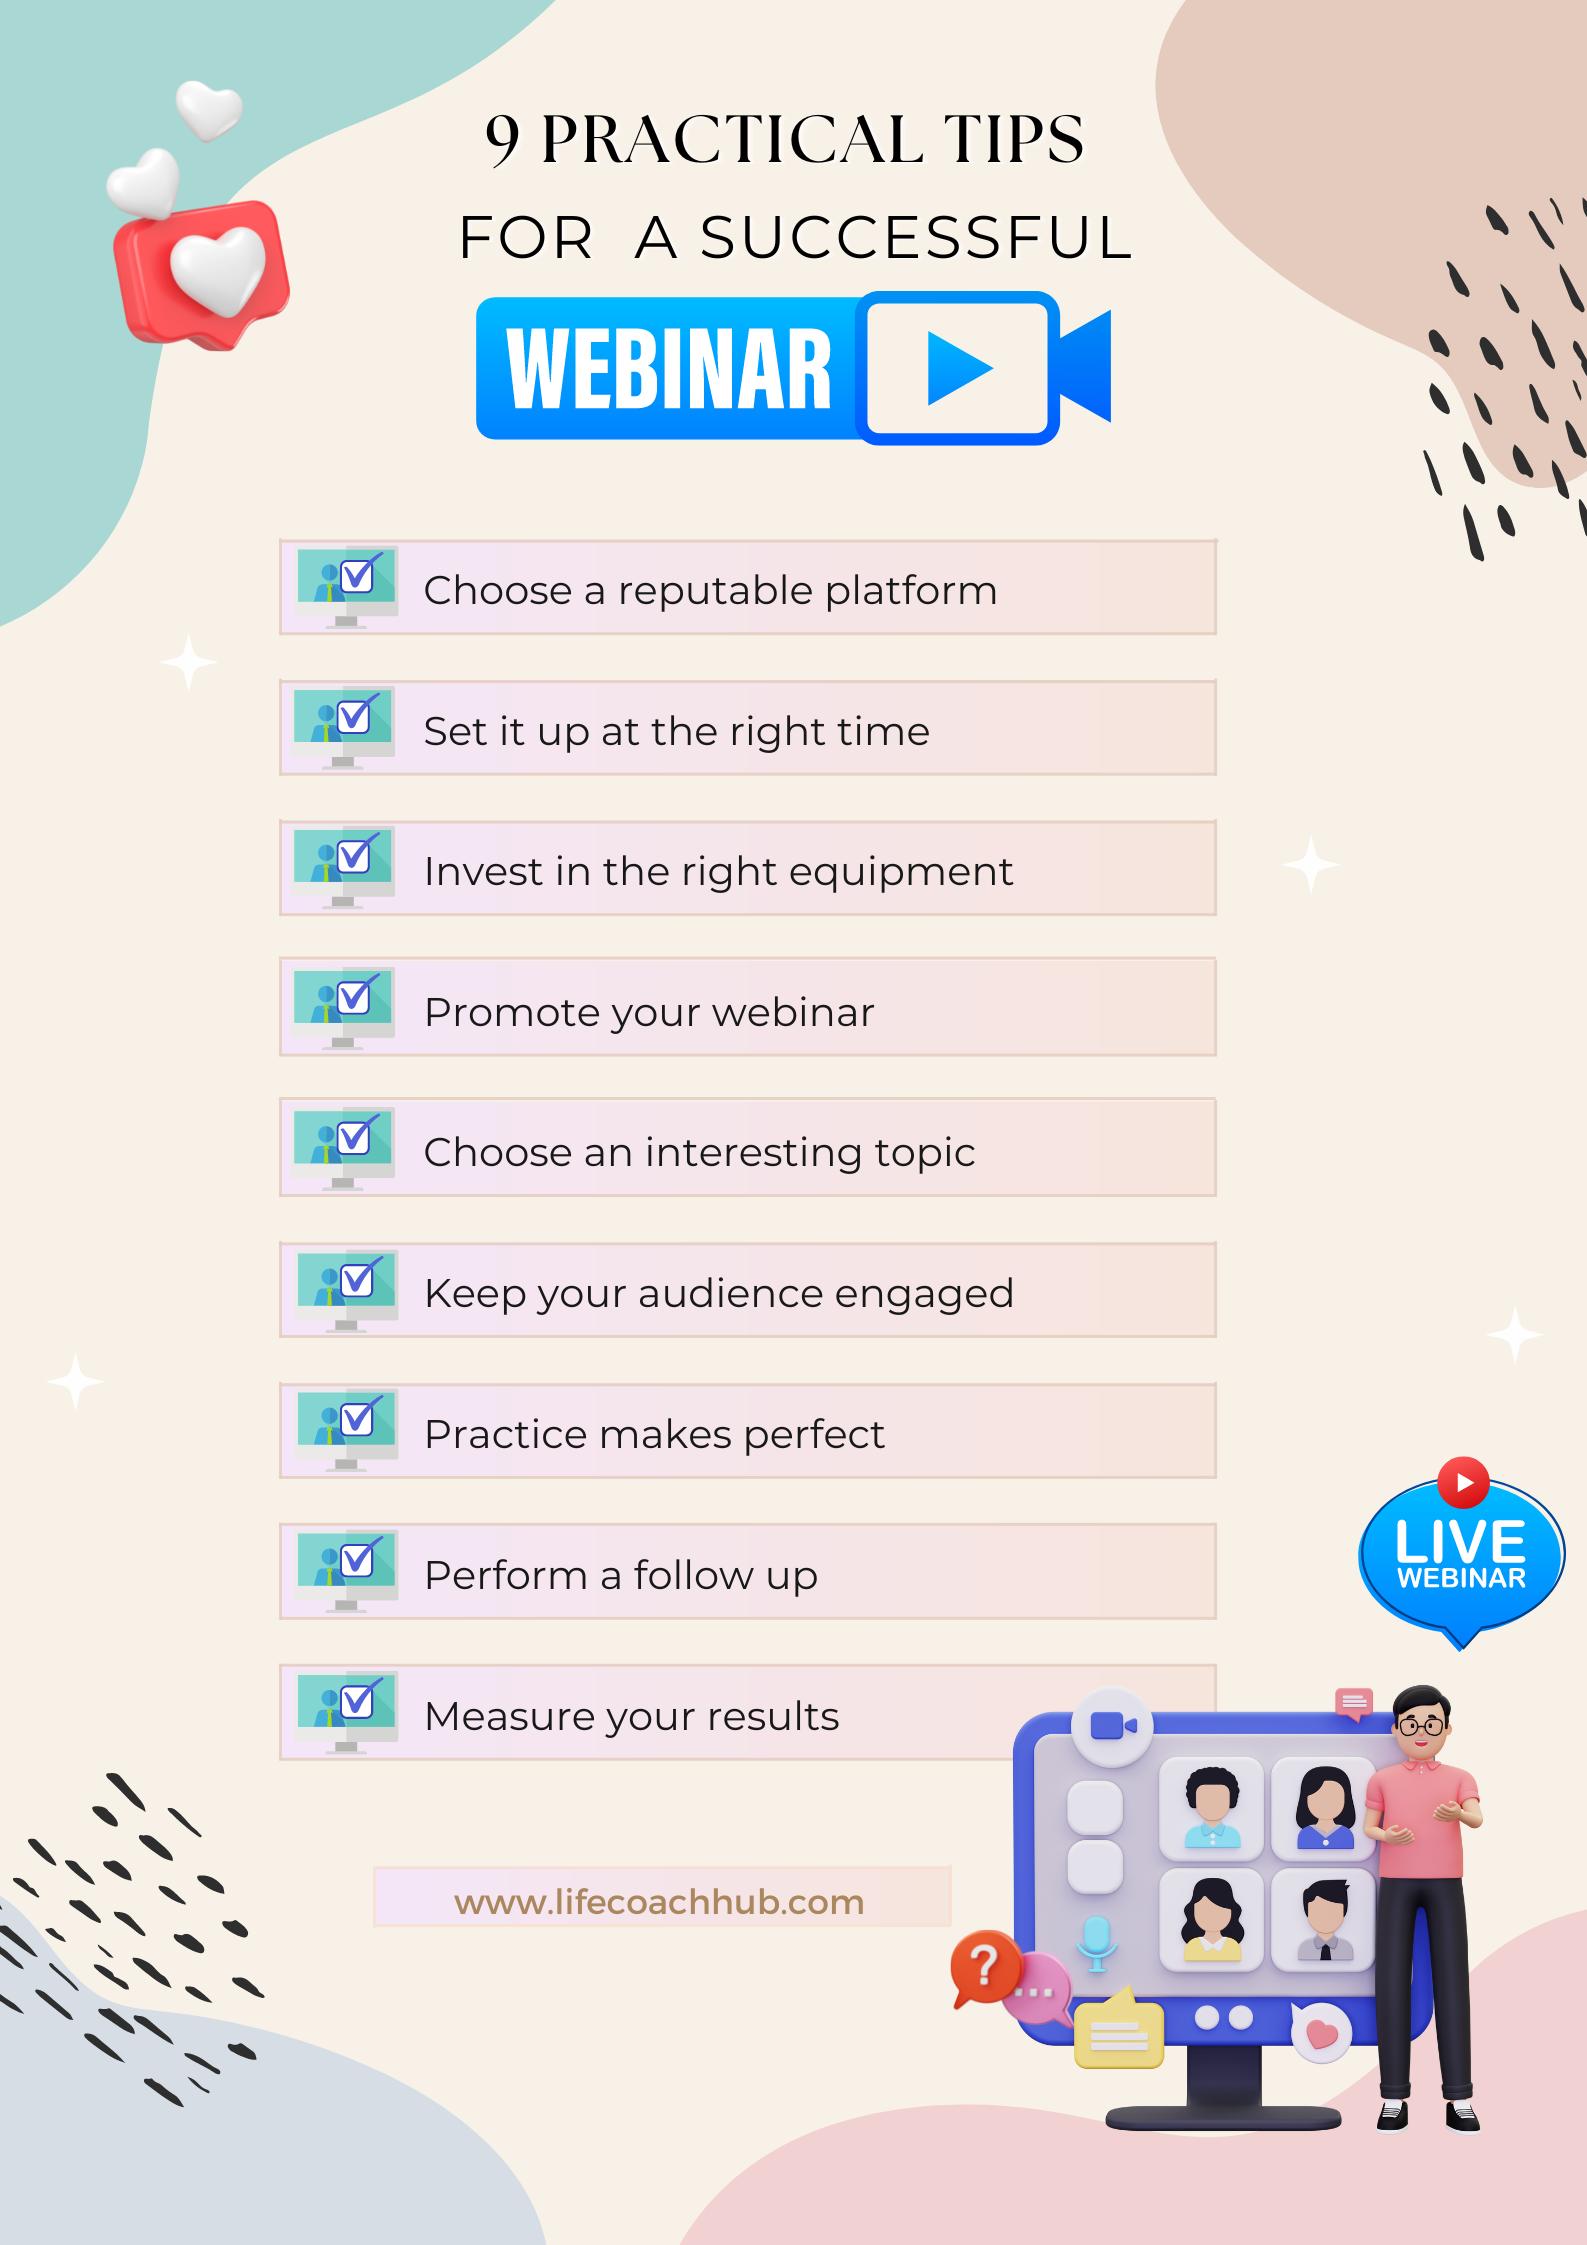 Tips for a successful webinar